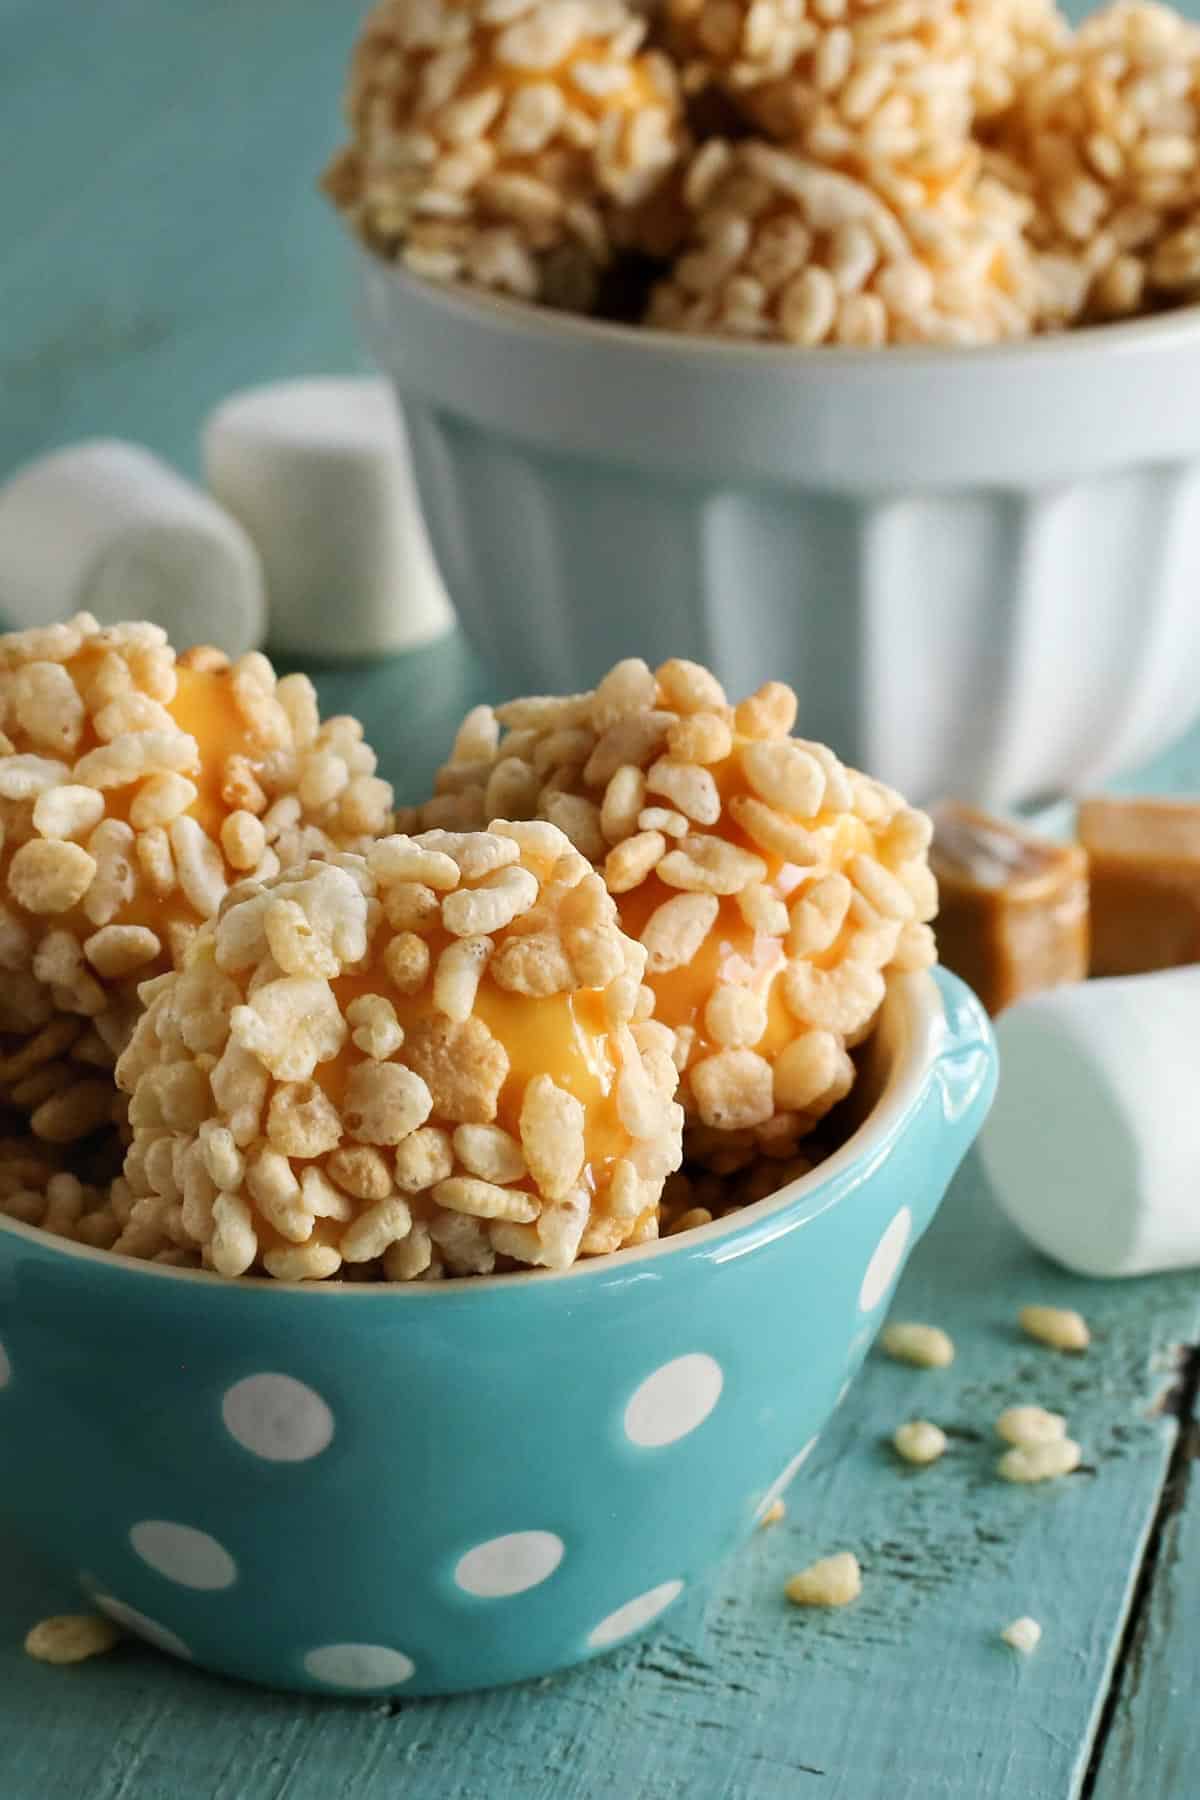 big marshmallows coated in caramel and Rice Krispies cereal, in a turquoise dotted bowl